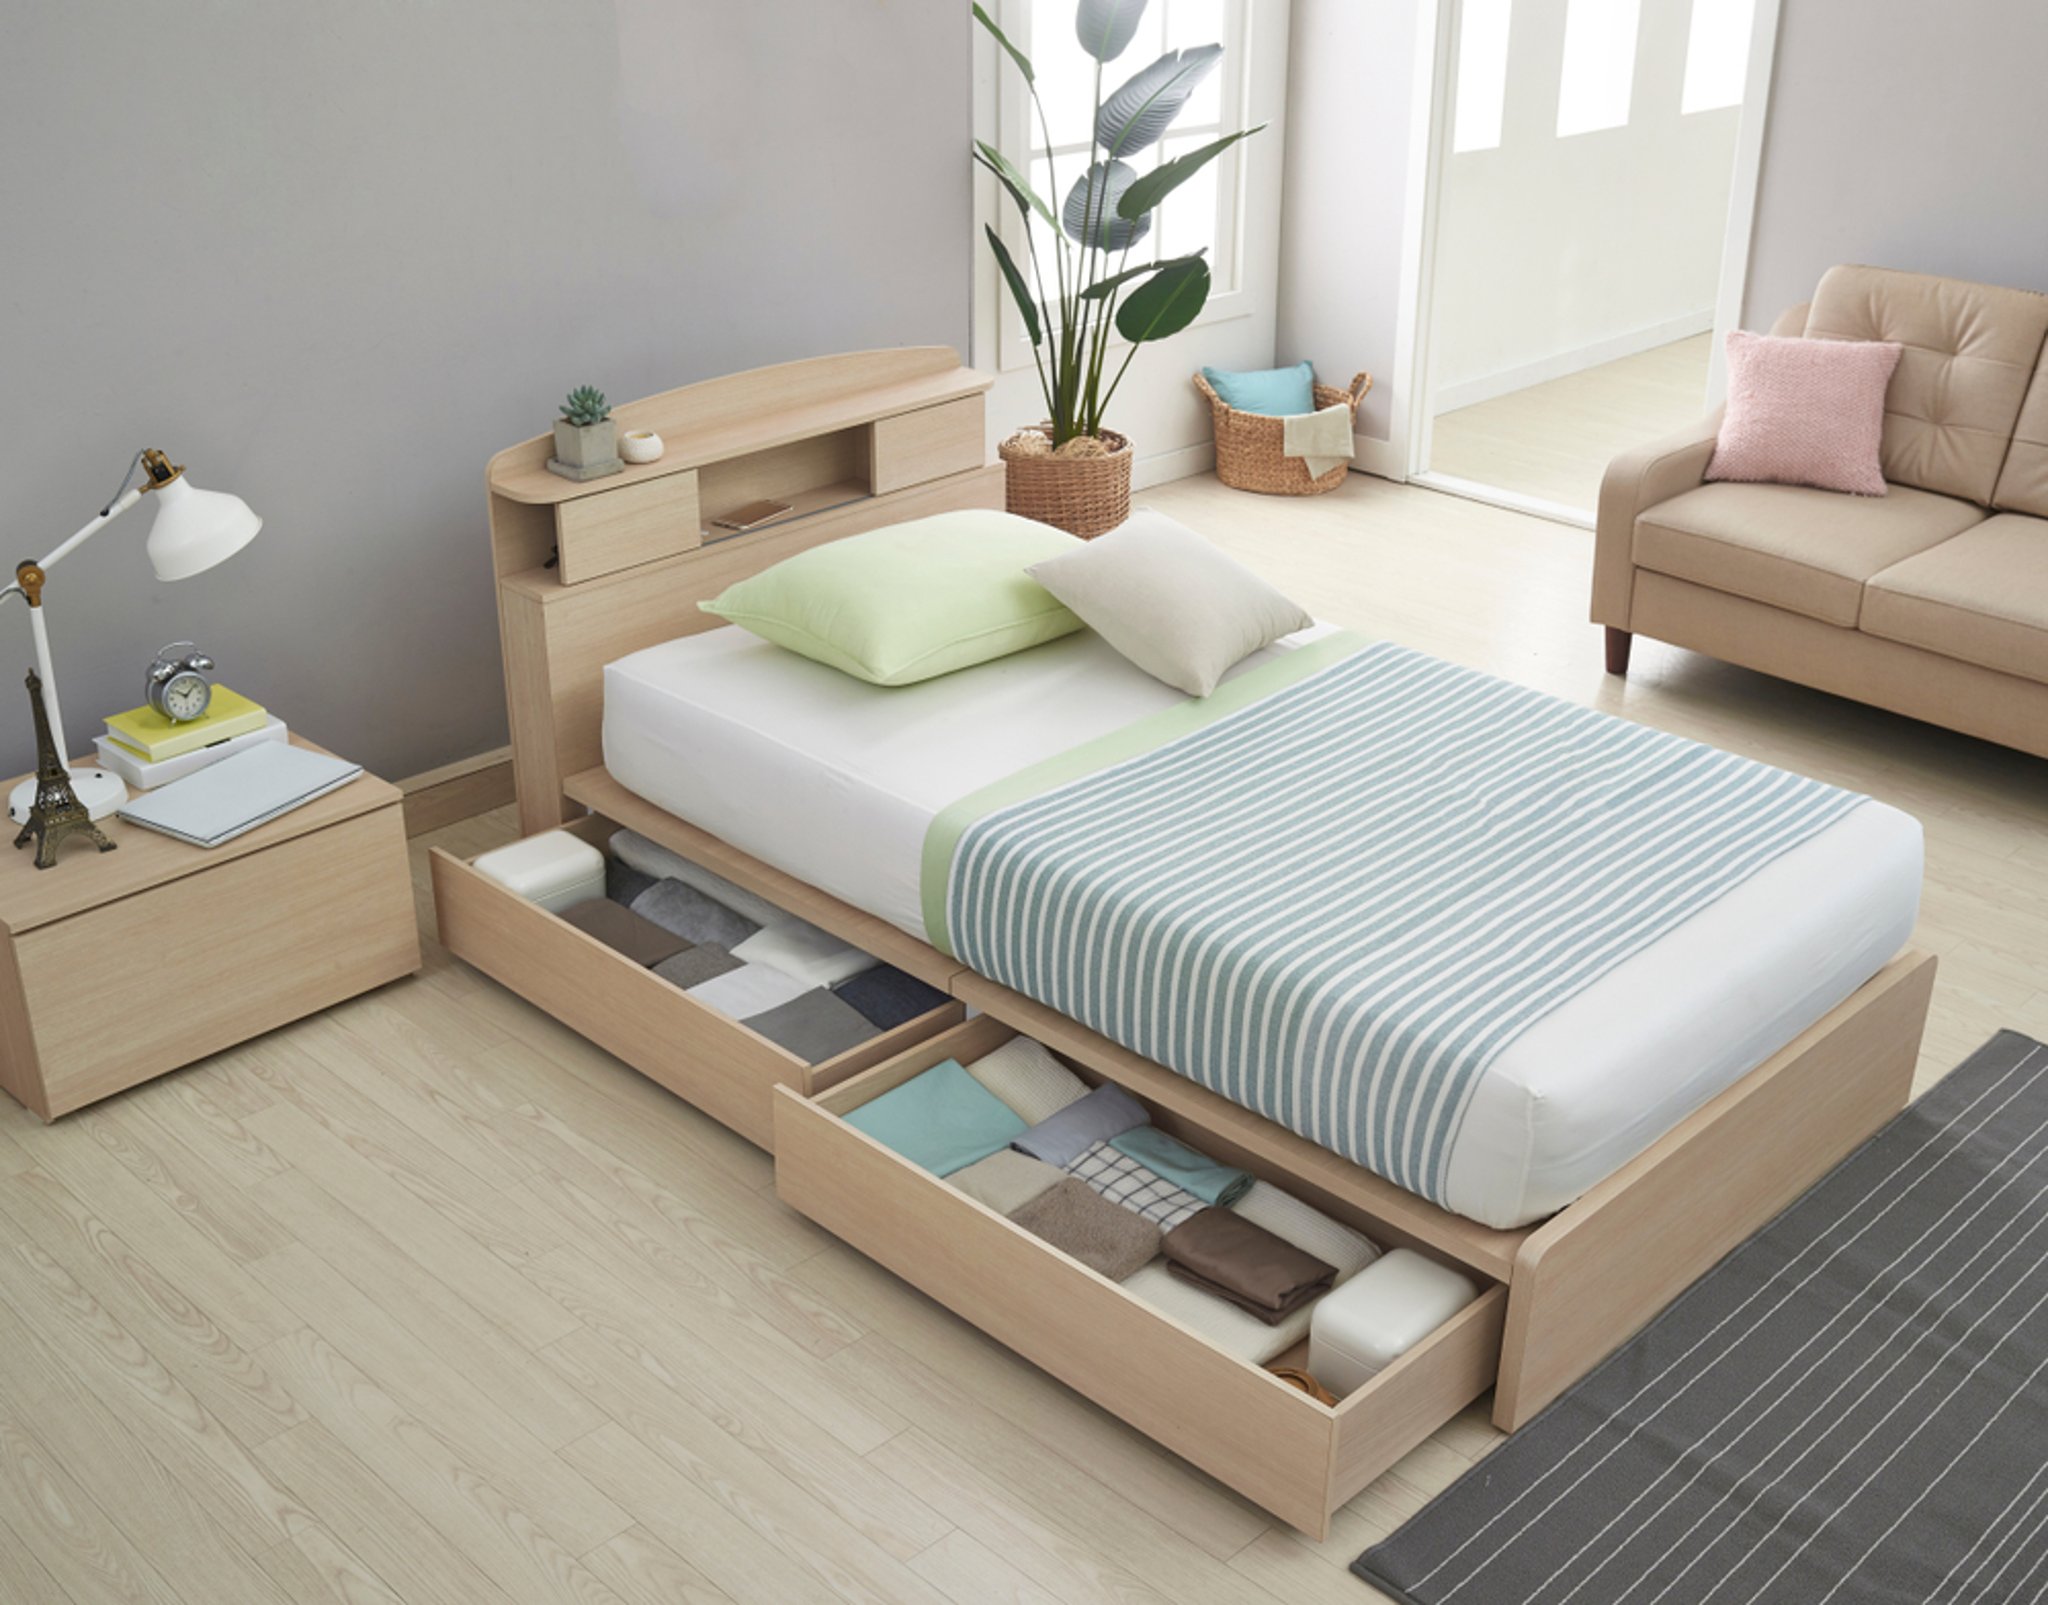 Storage Beds Uk The Best With, King Size Bed Frame With Drawers Underneath